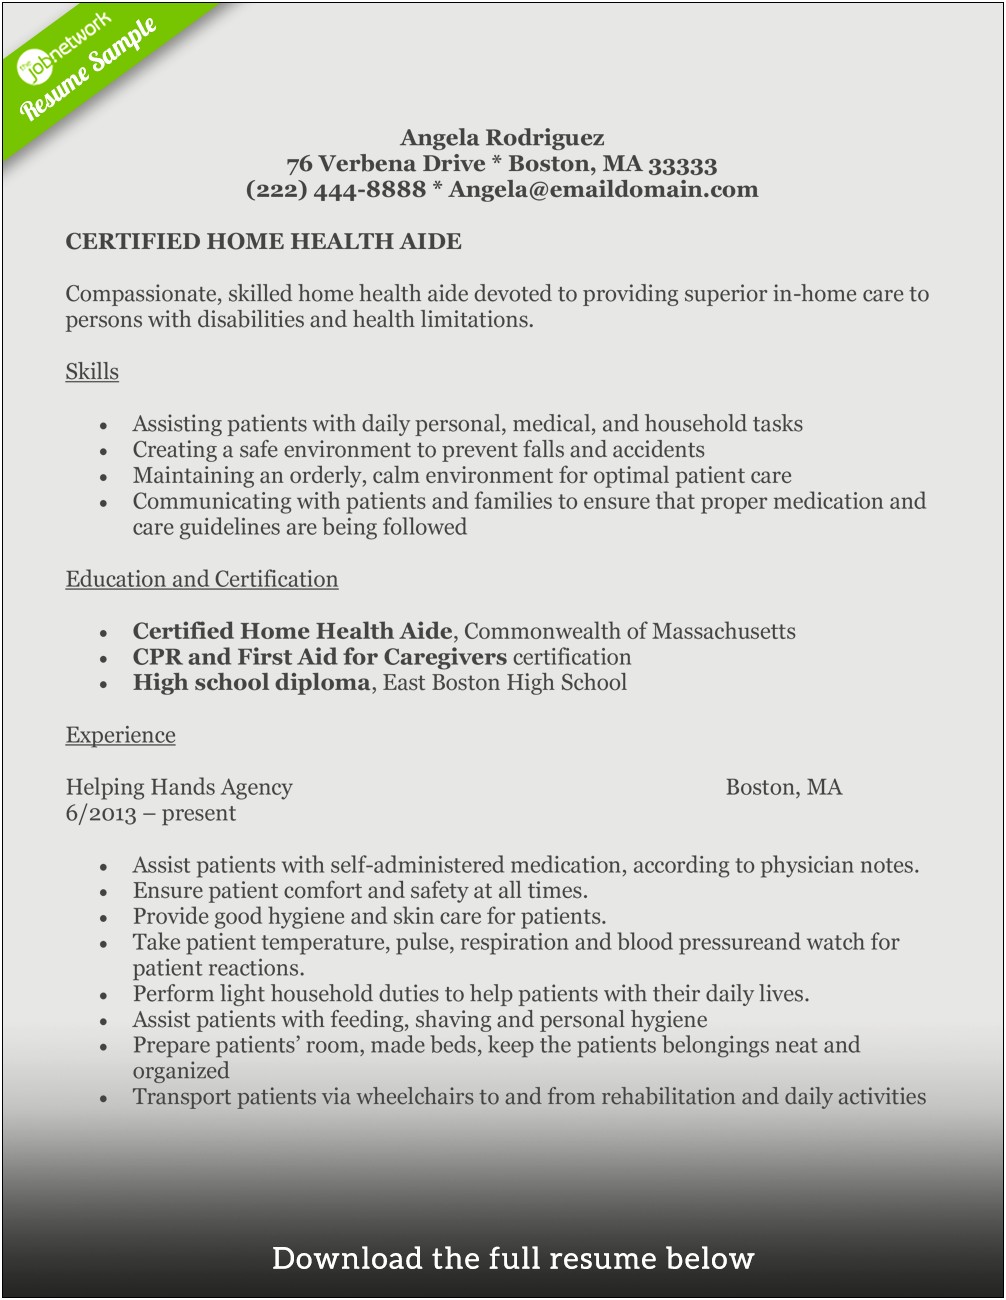 Medical Resume Summary Statement Examples